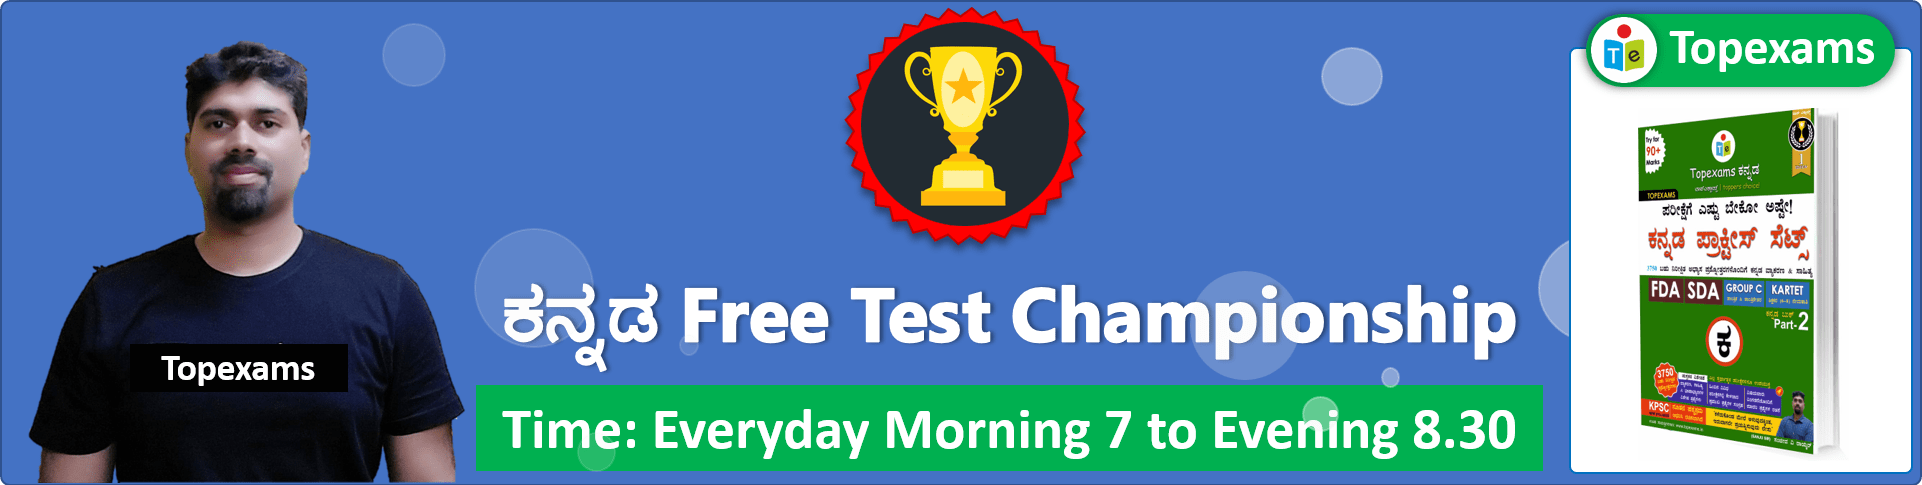 You are currently viewing Test-6 ಕನ್ನಡ Championship  For SDA, FDA, Group C, KARTET